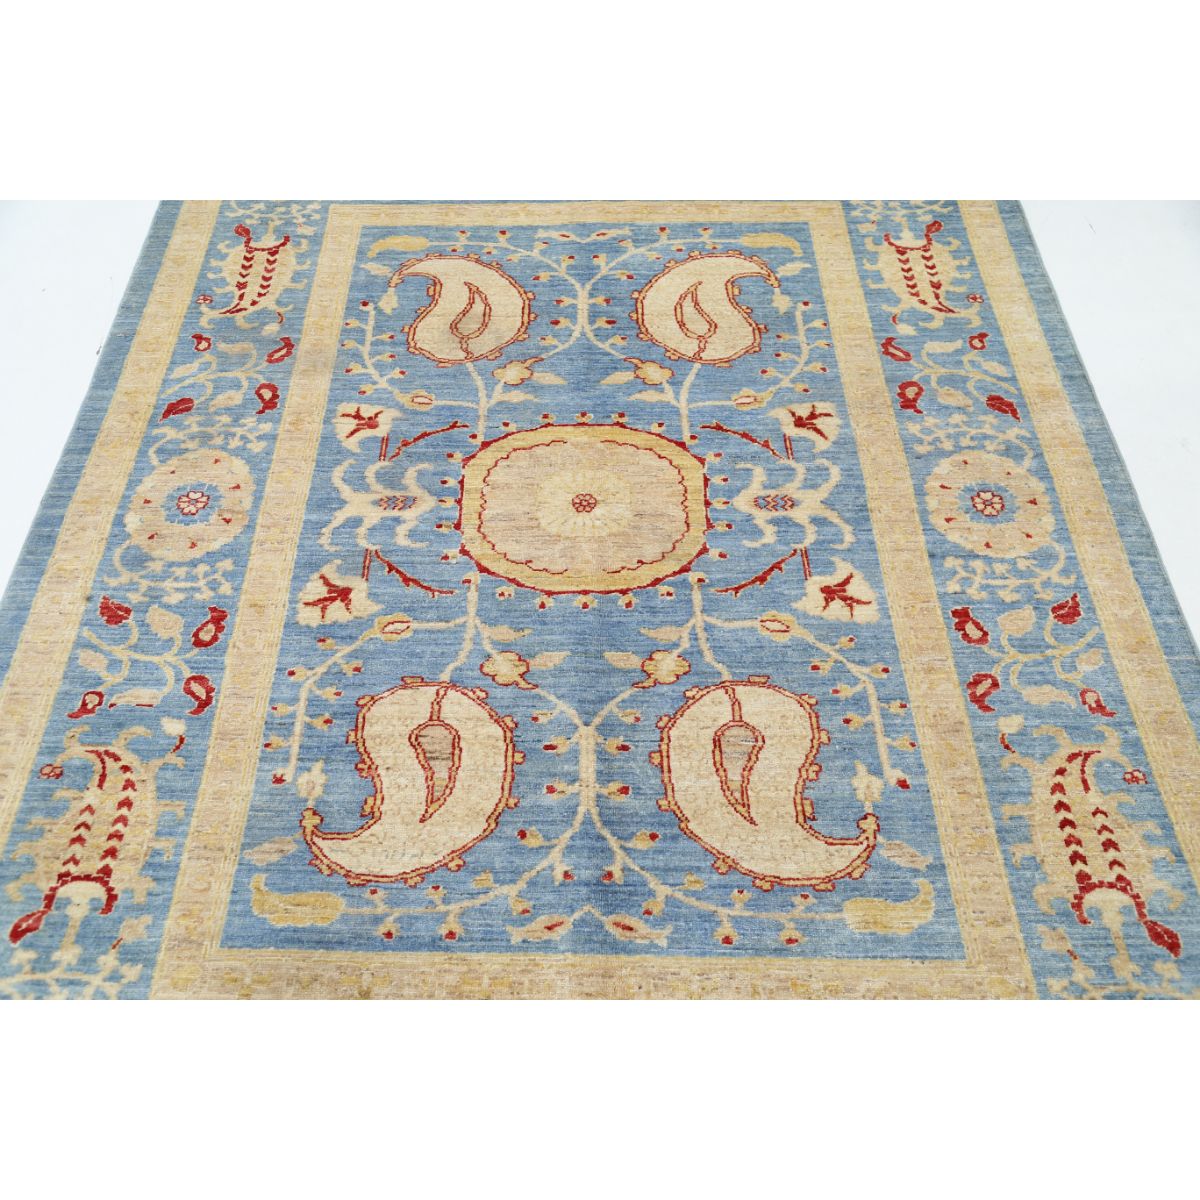 Ziegler 5'7" X 7'7" Wool Hand-Knotted Rug